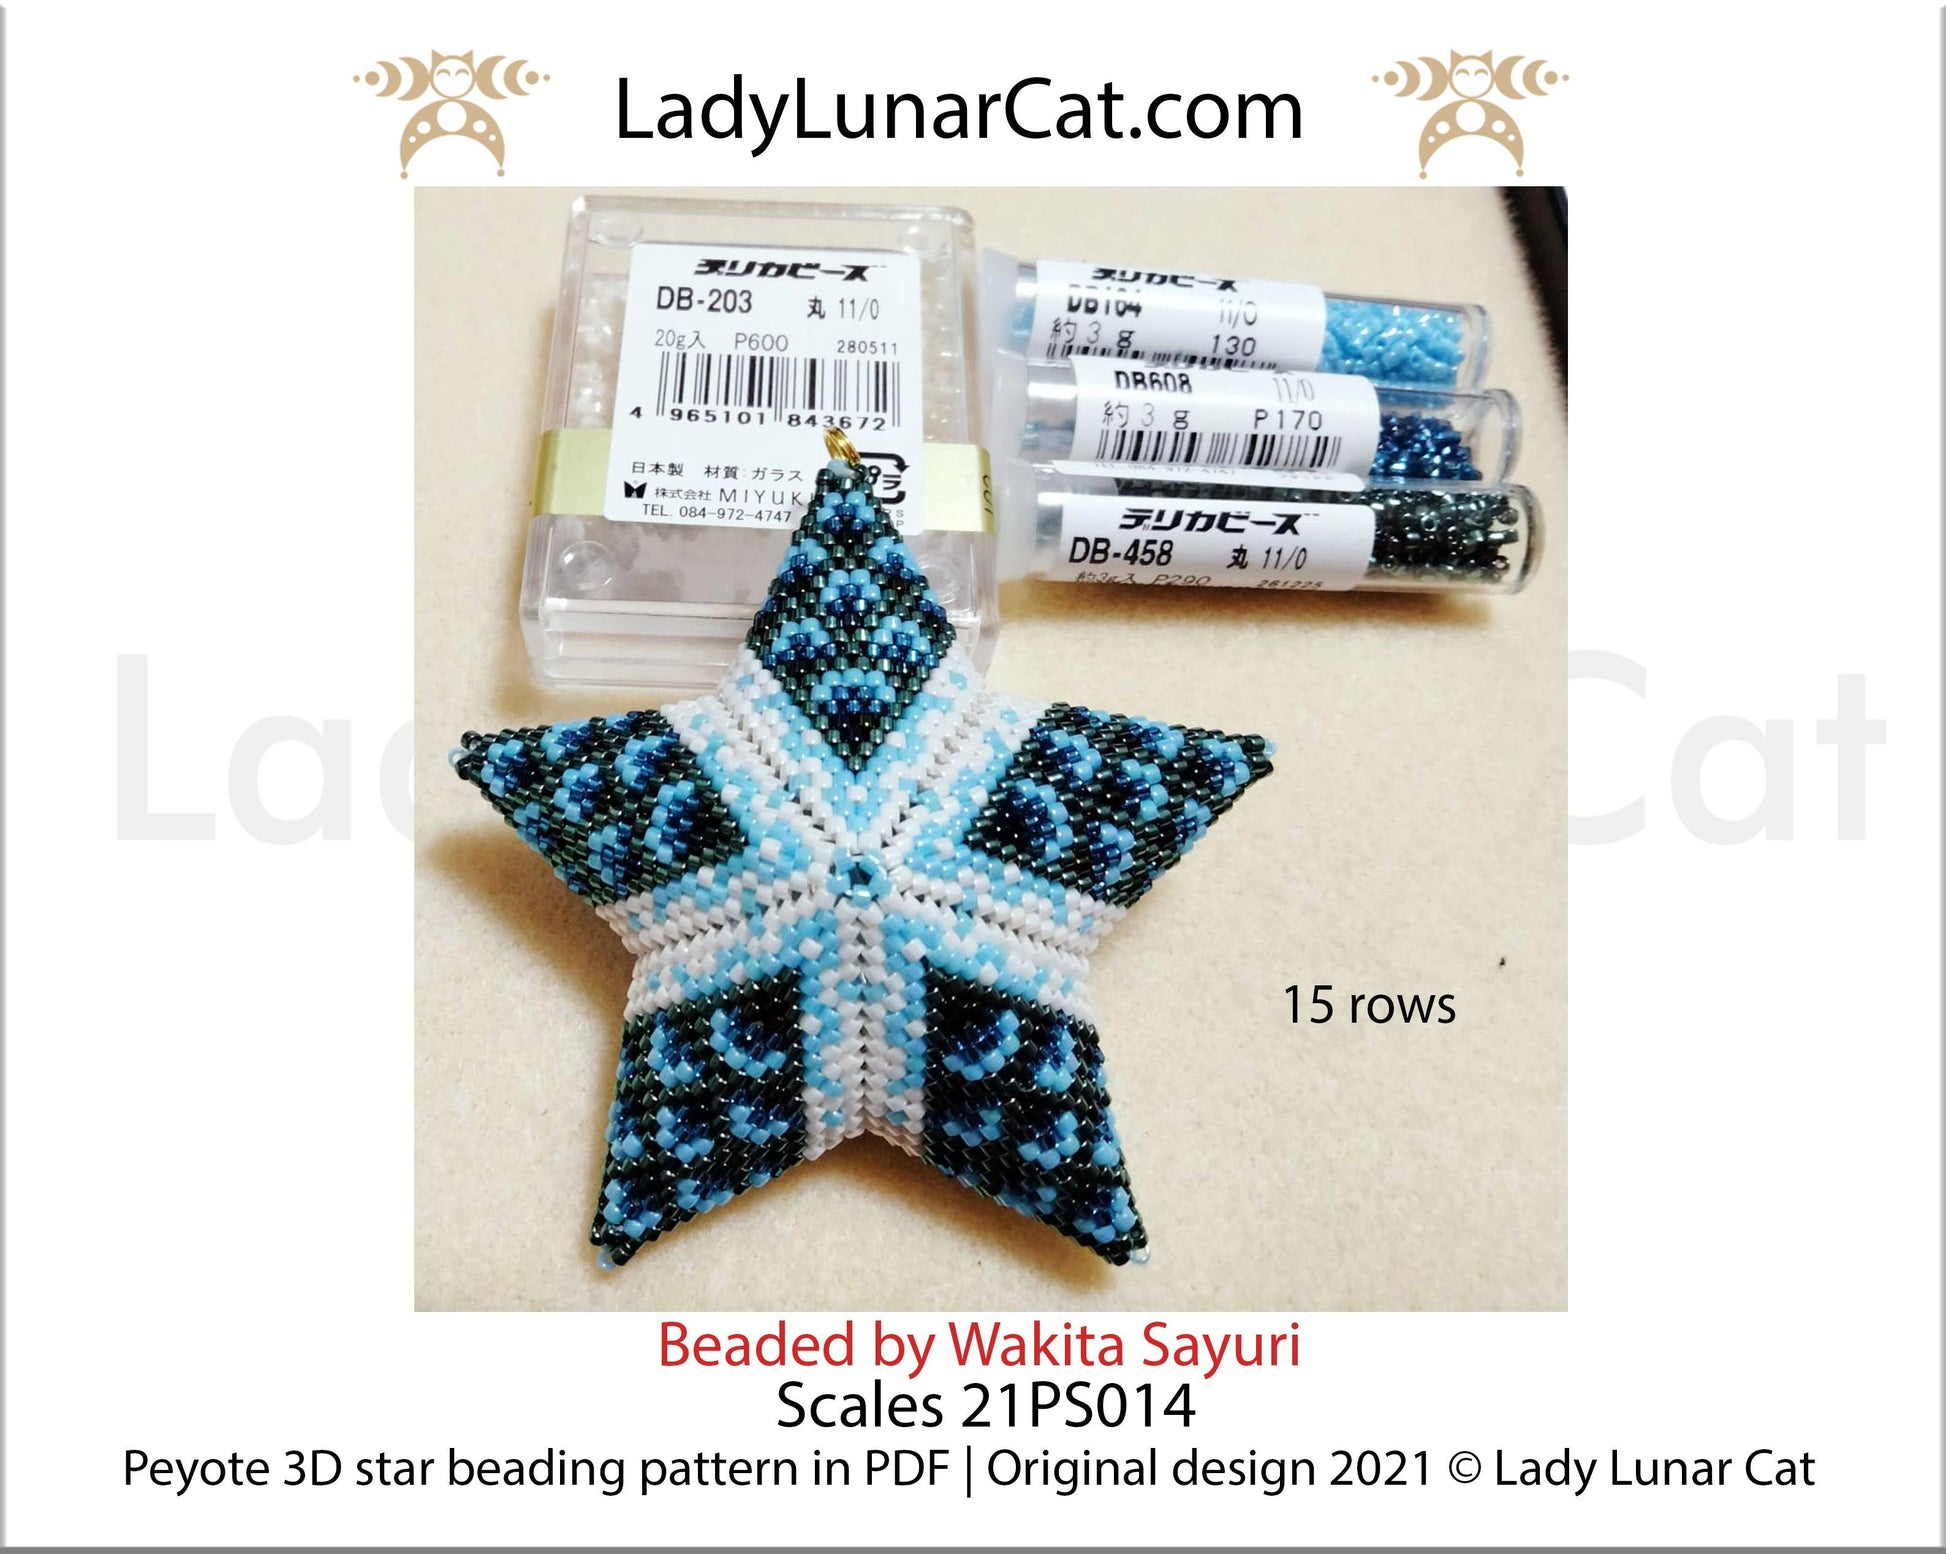 Beaded star pattern for beading - Scales 21PS014 - LadyLunarCat